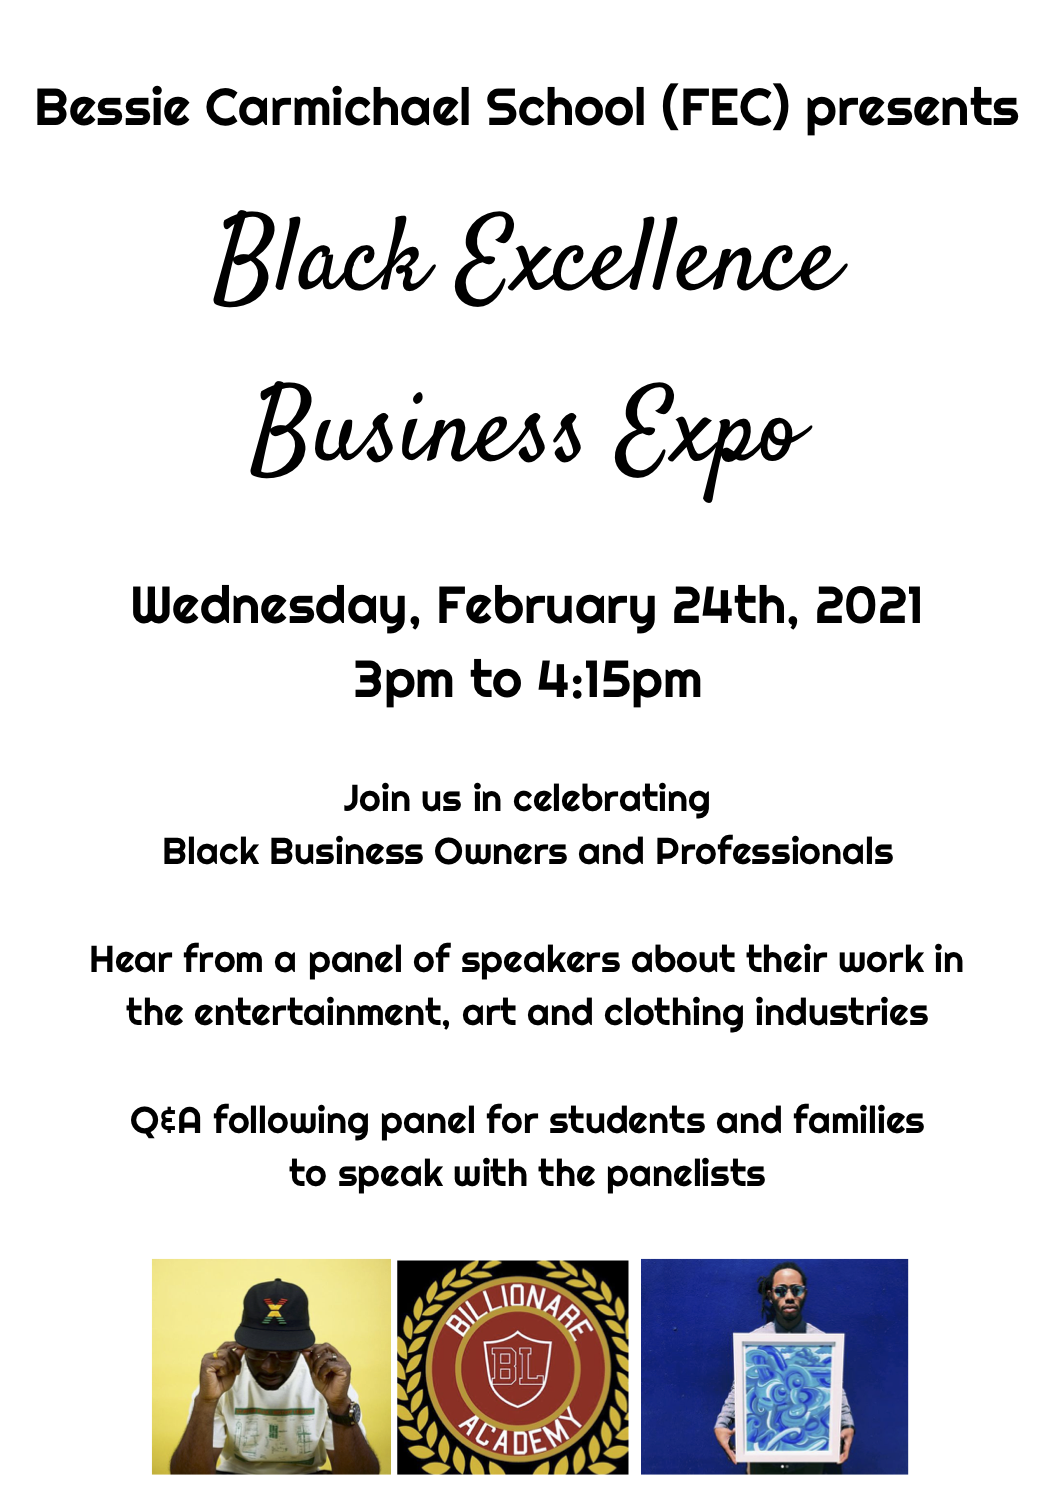 Black Excellence Business Expo